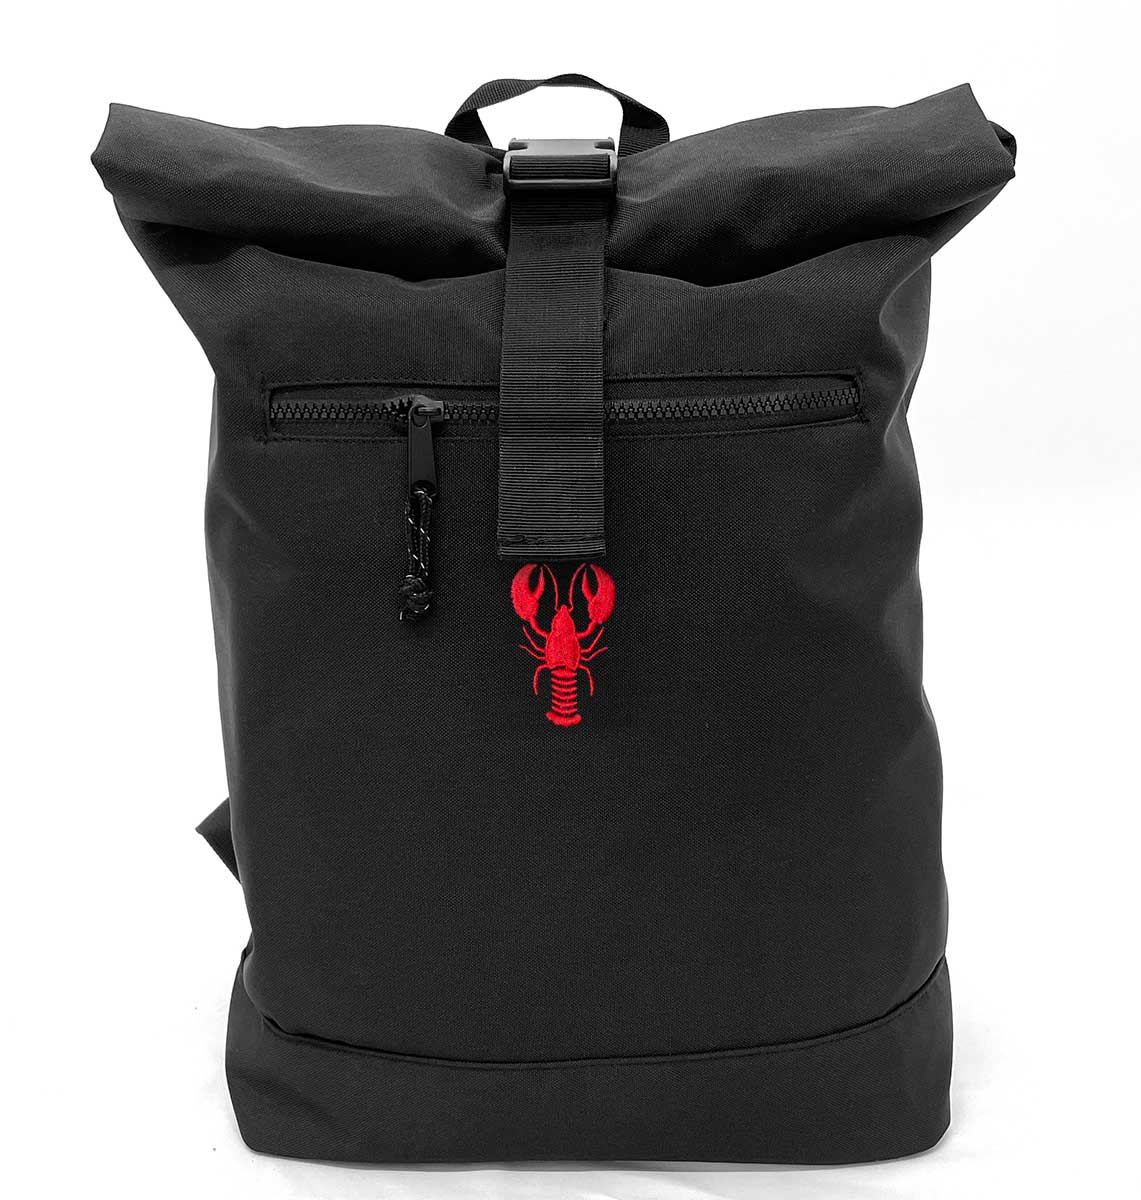 Lobster Beach Roll-top Recycled Backpack - Blue Panda